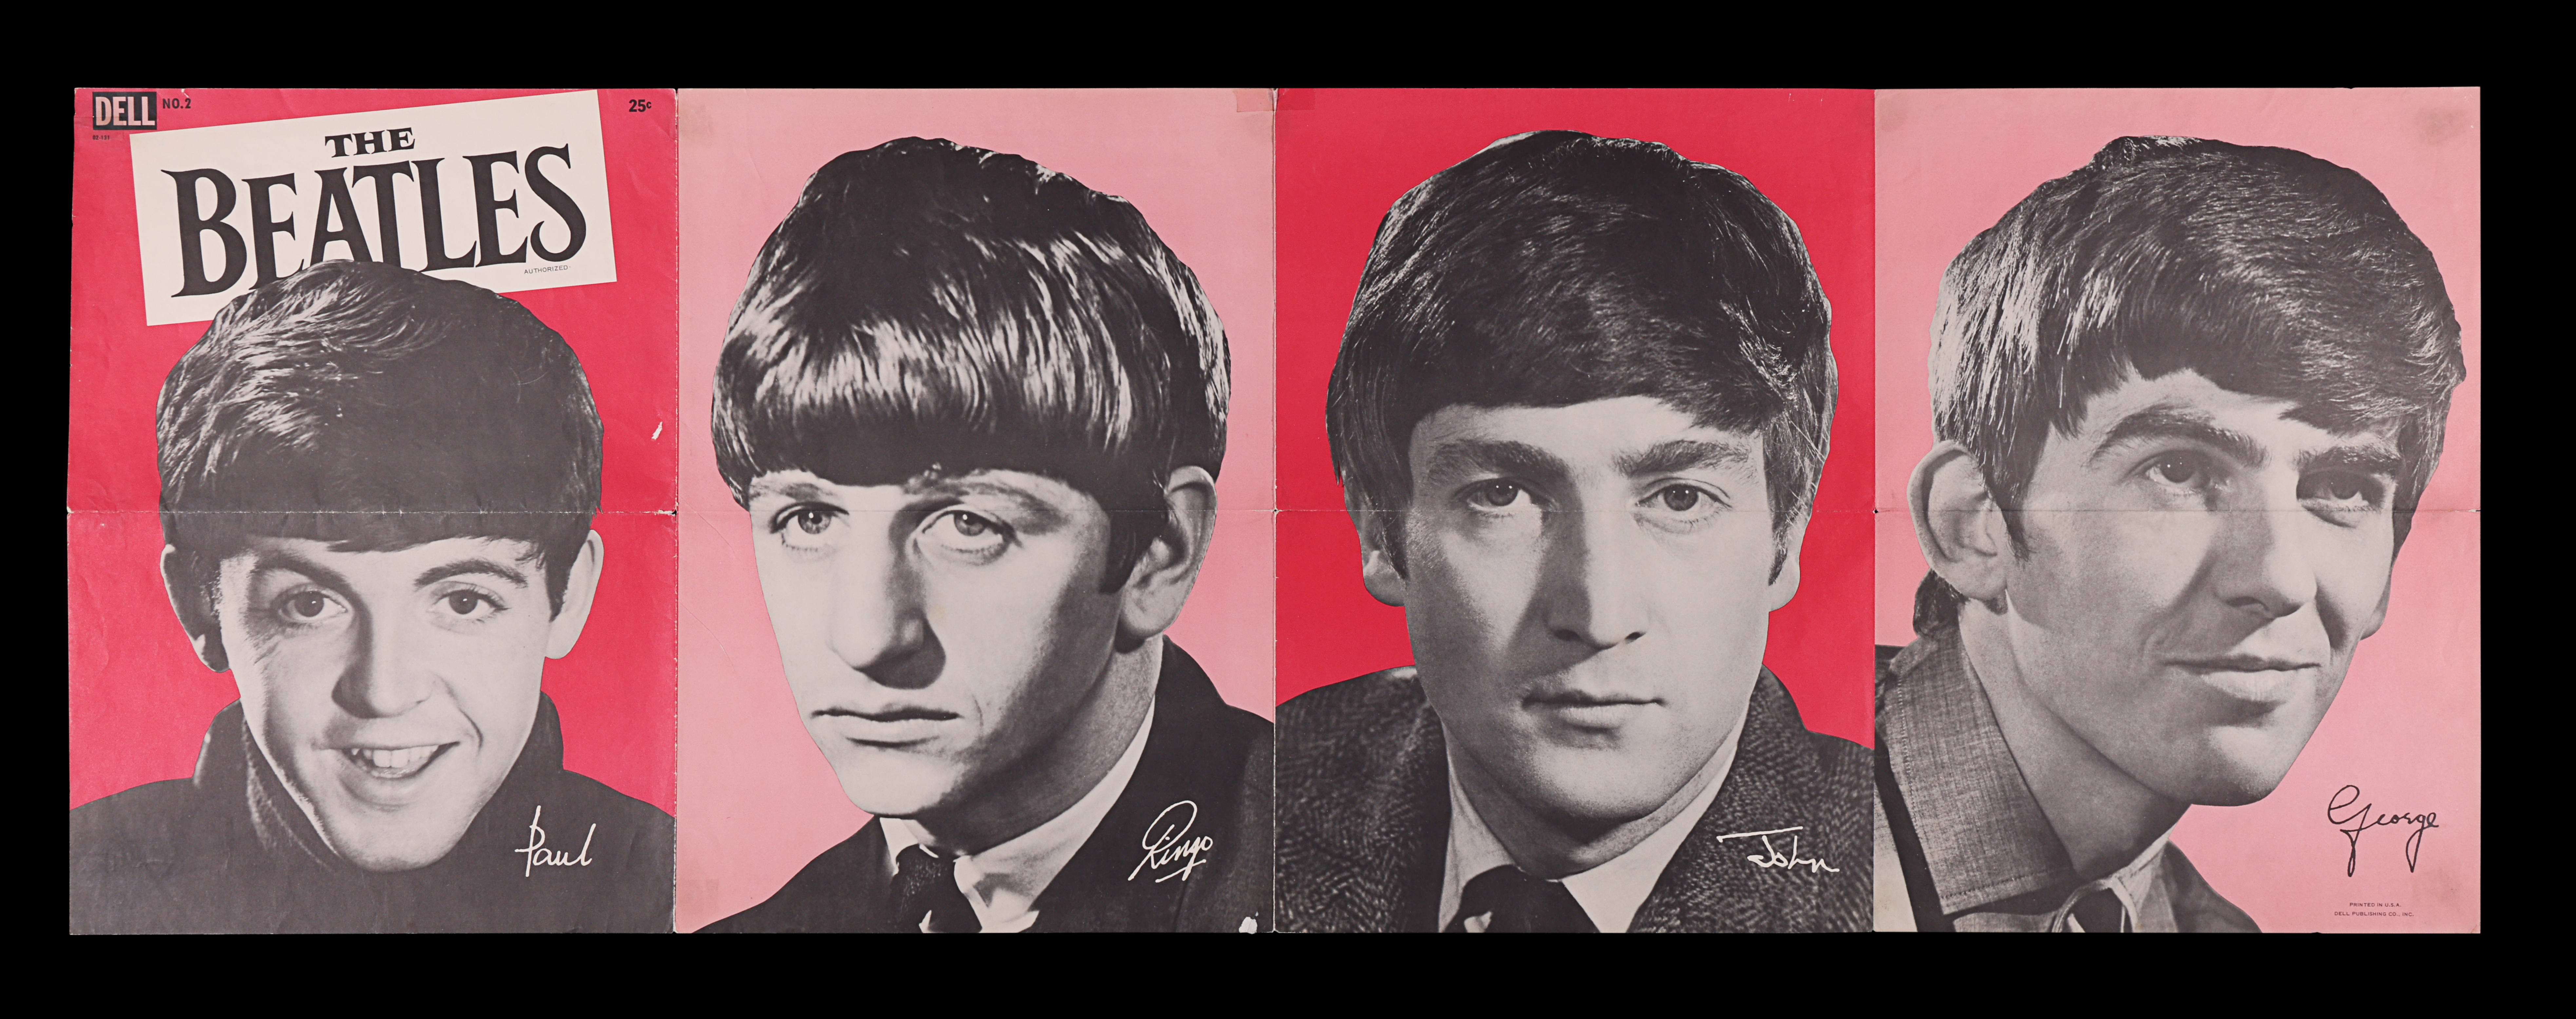 THE BEATLES - Set of Two Dell Magazine Fan Posters, 1964 - Image 3 of 3